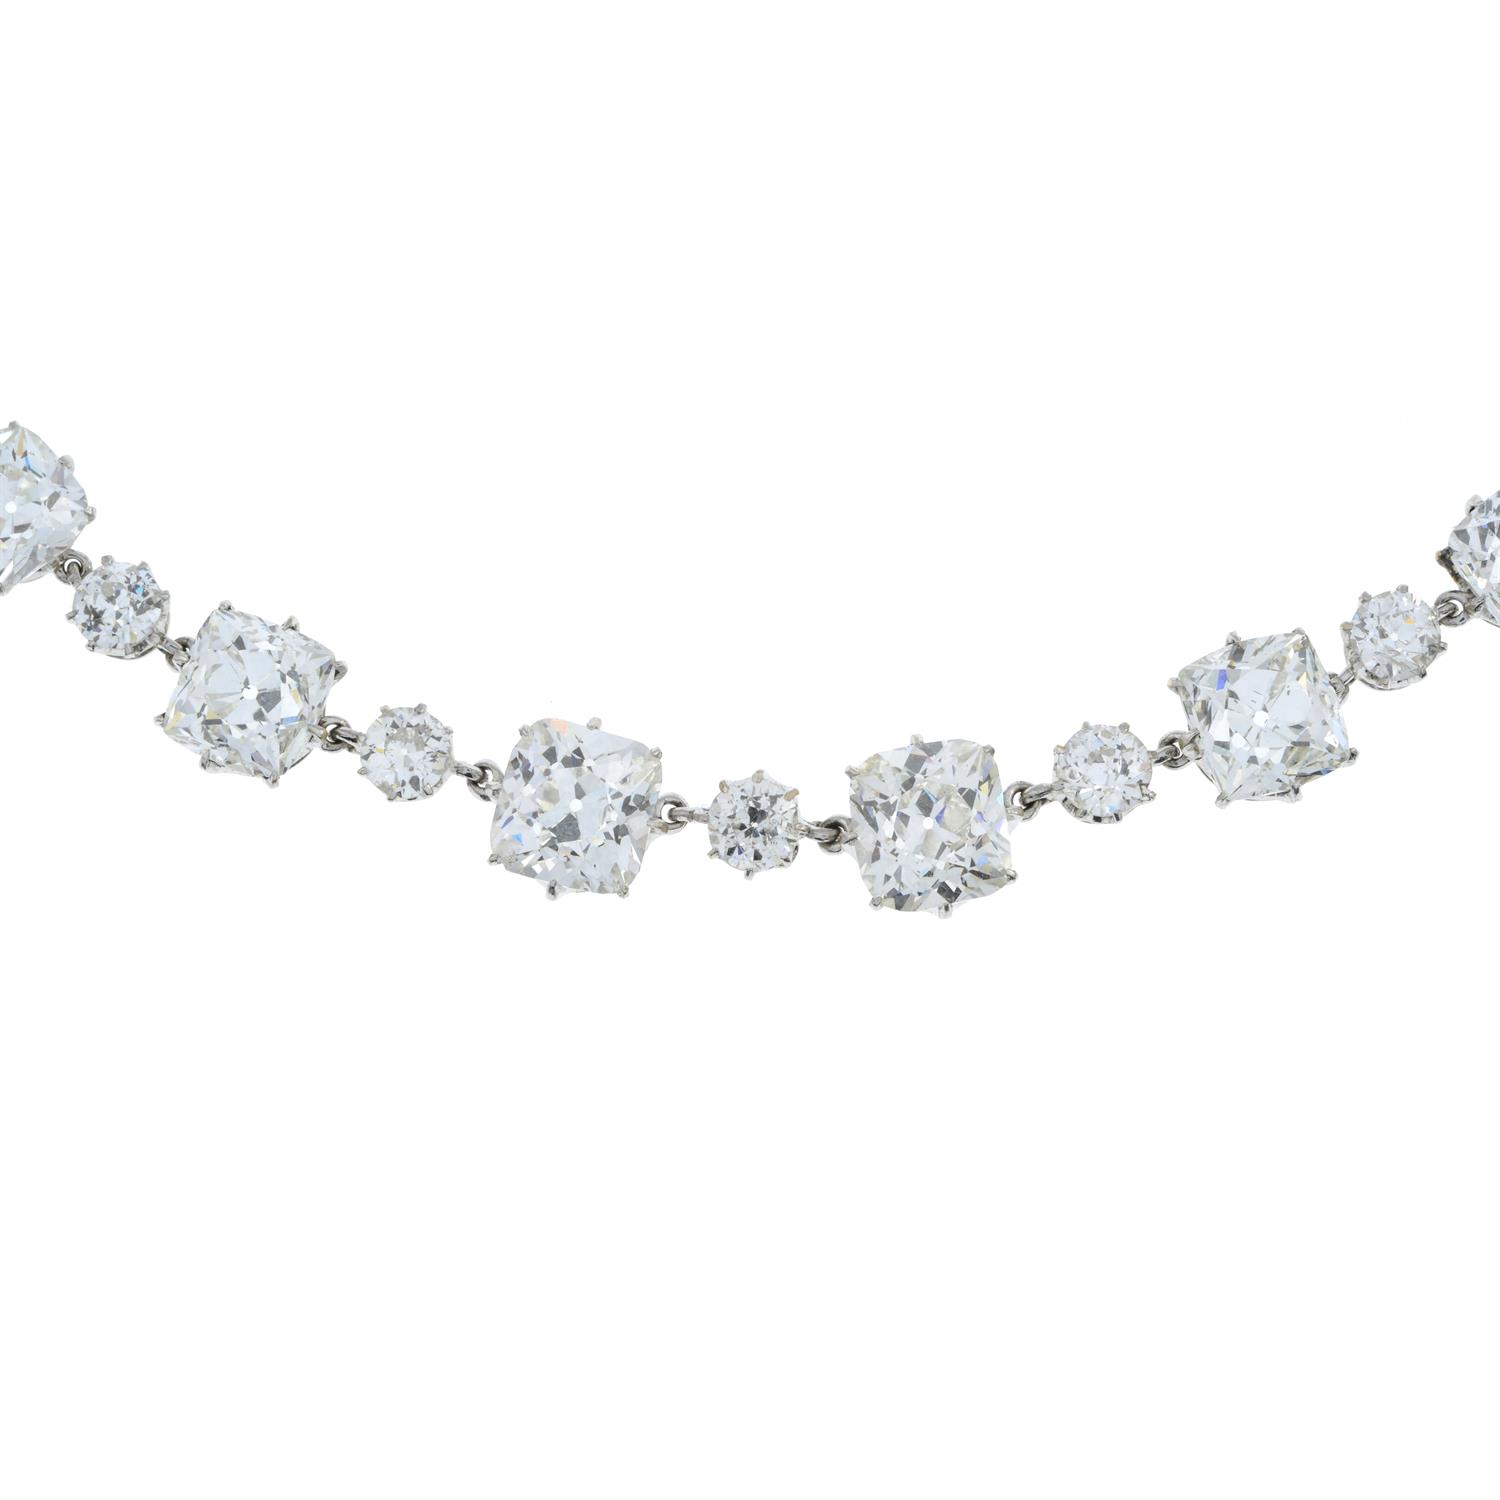 Early 20th century graduated diamond line necklace - Image 5 of 7